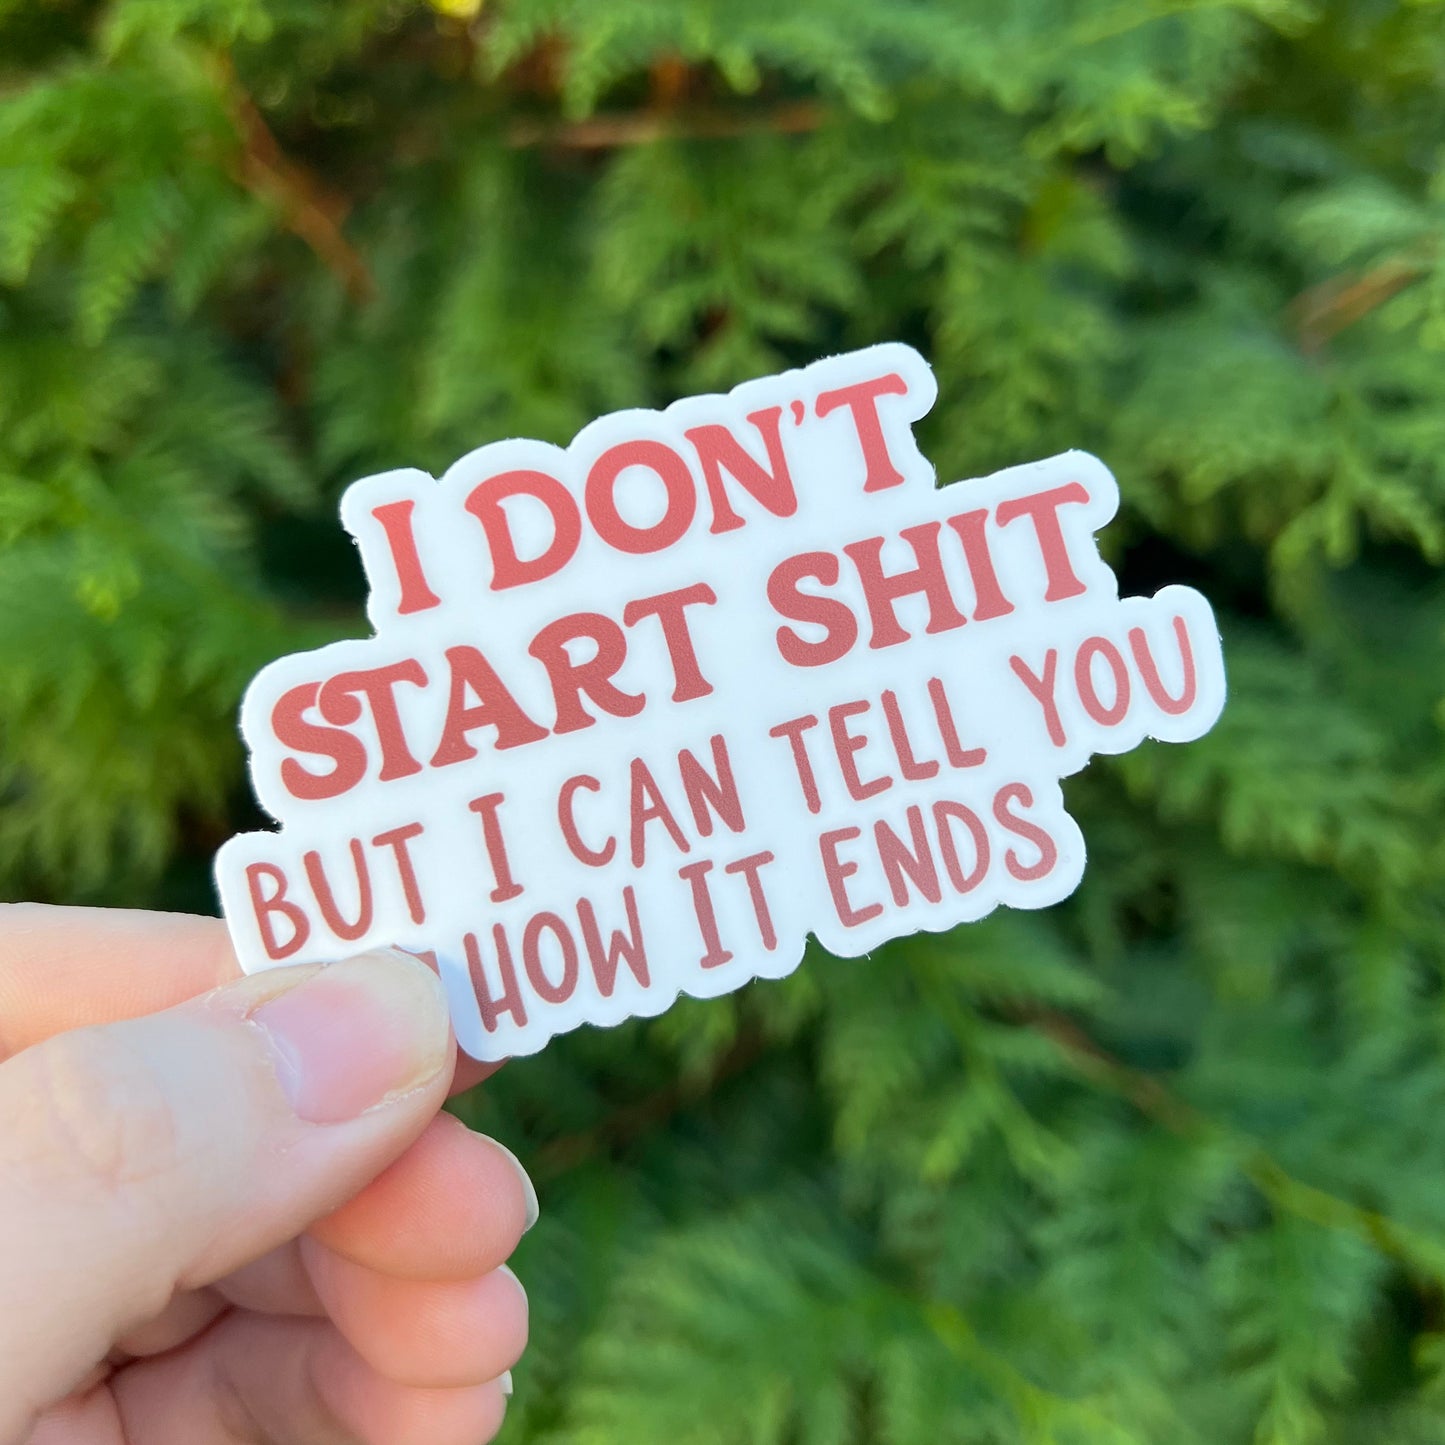 I Don't Start Shit But I Can Tell You How it Ends Die Cut Sticker